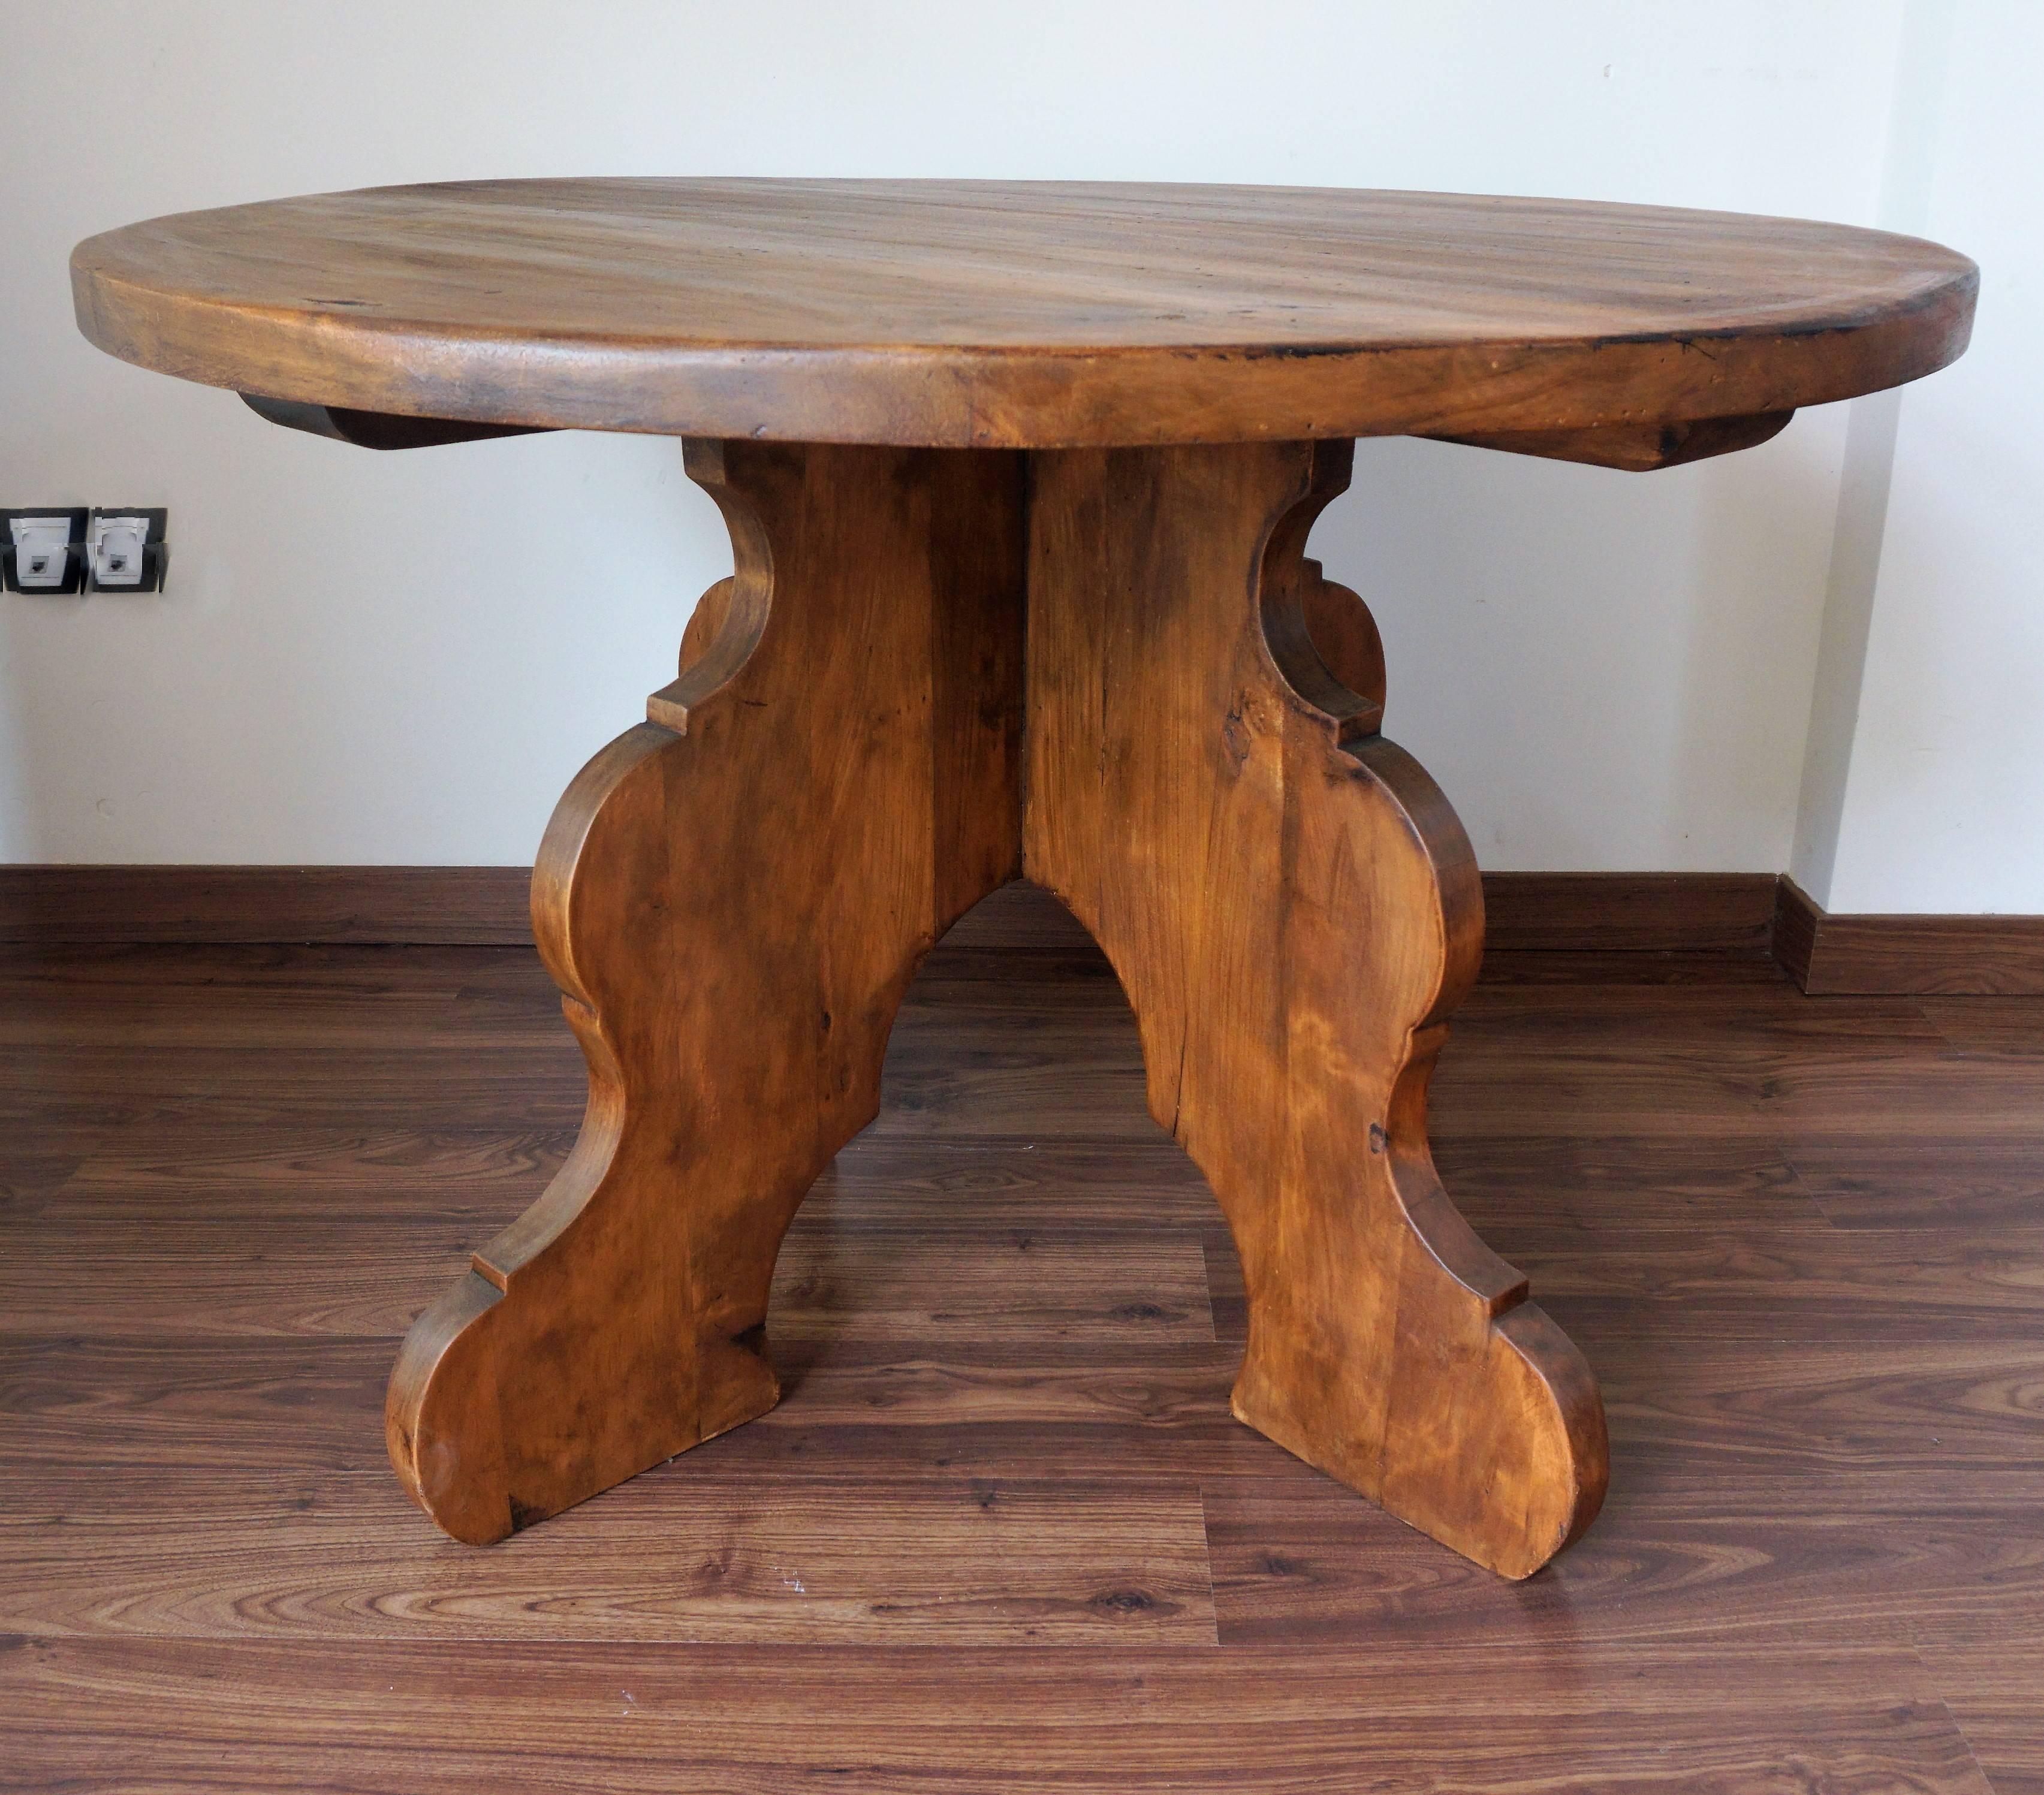 Country 20th Century Rustic Round Coffee Table or Side Table